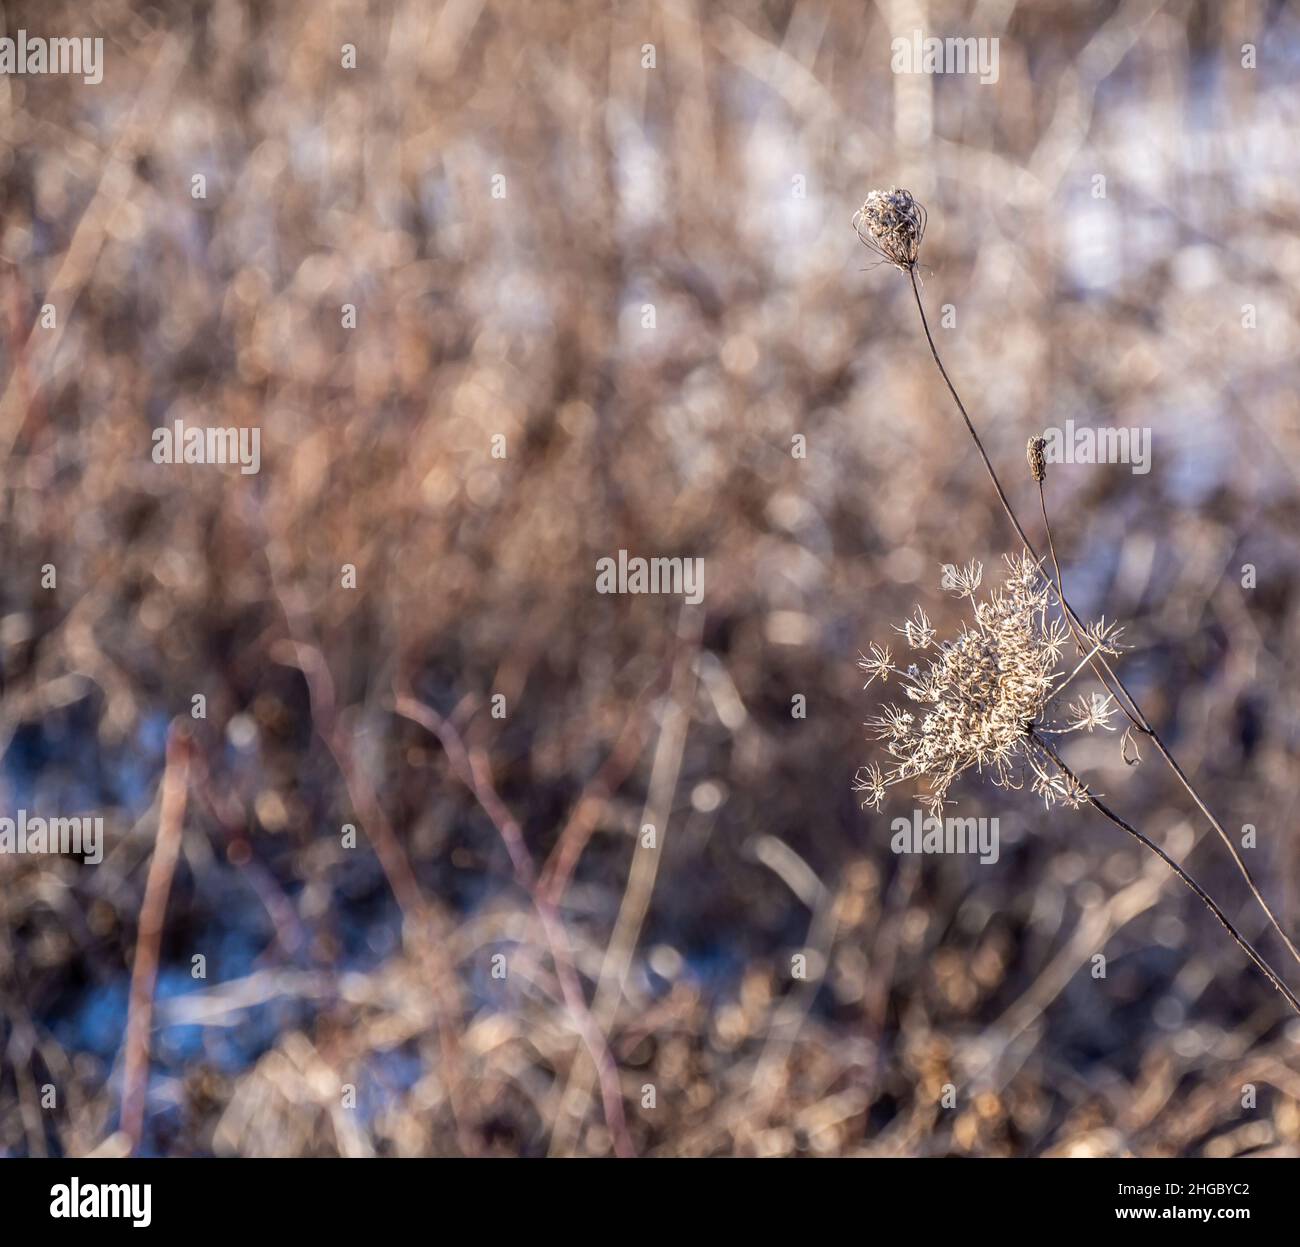 Close-up of a dried wilted queen anne's lace flower on a cold winters day with a blurred background. Stock Photo